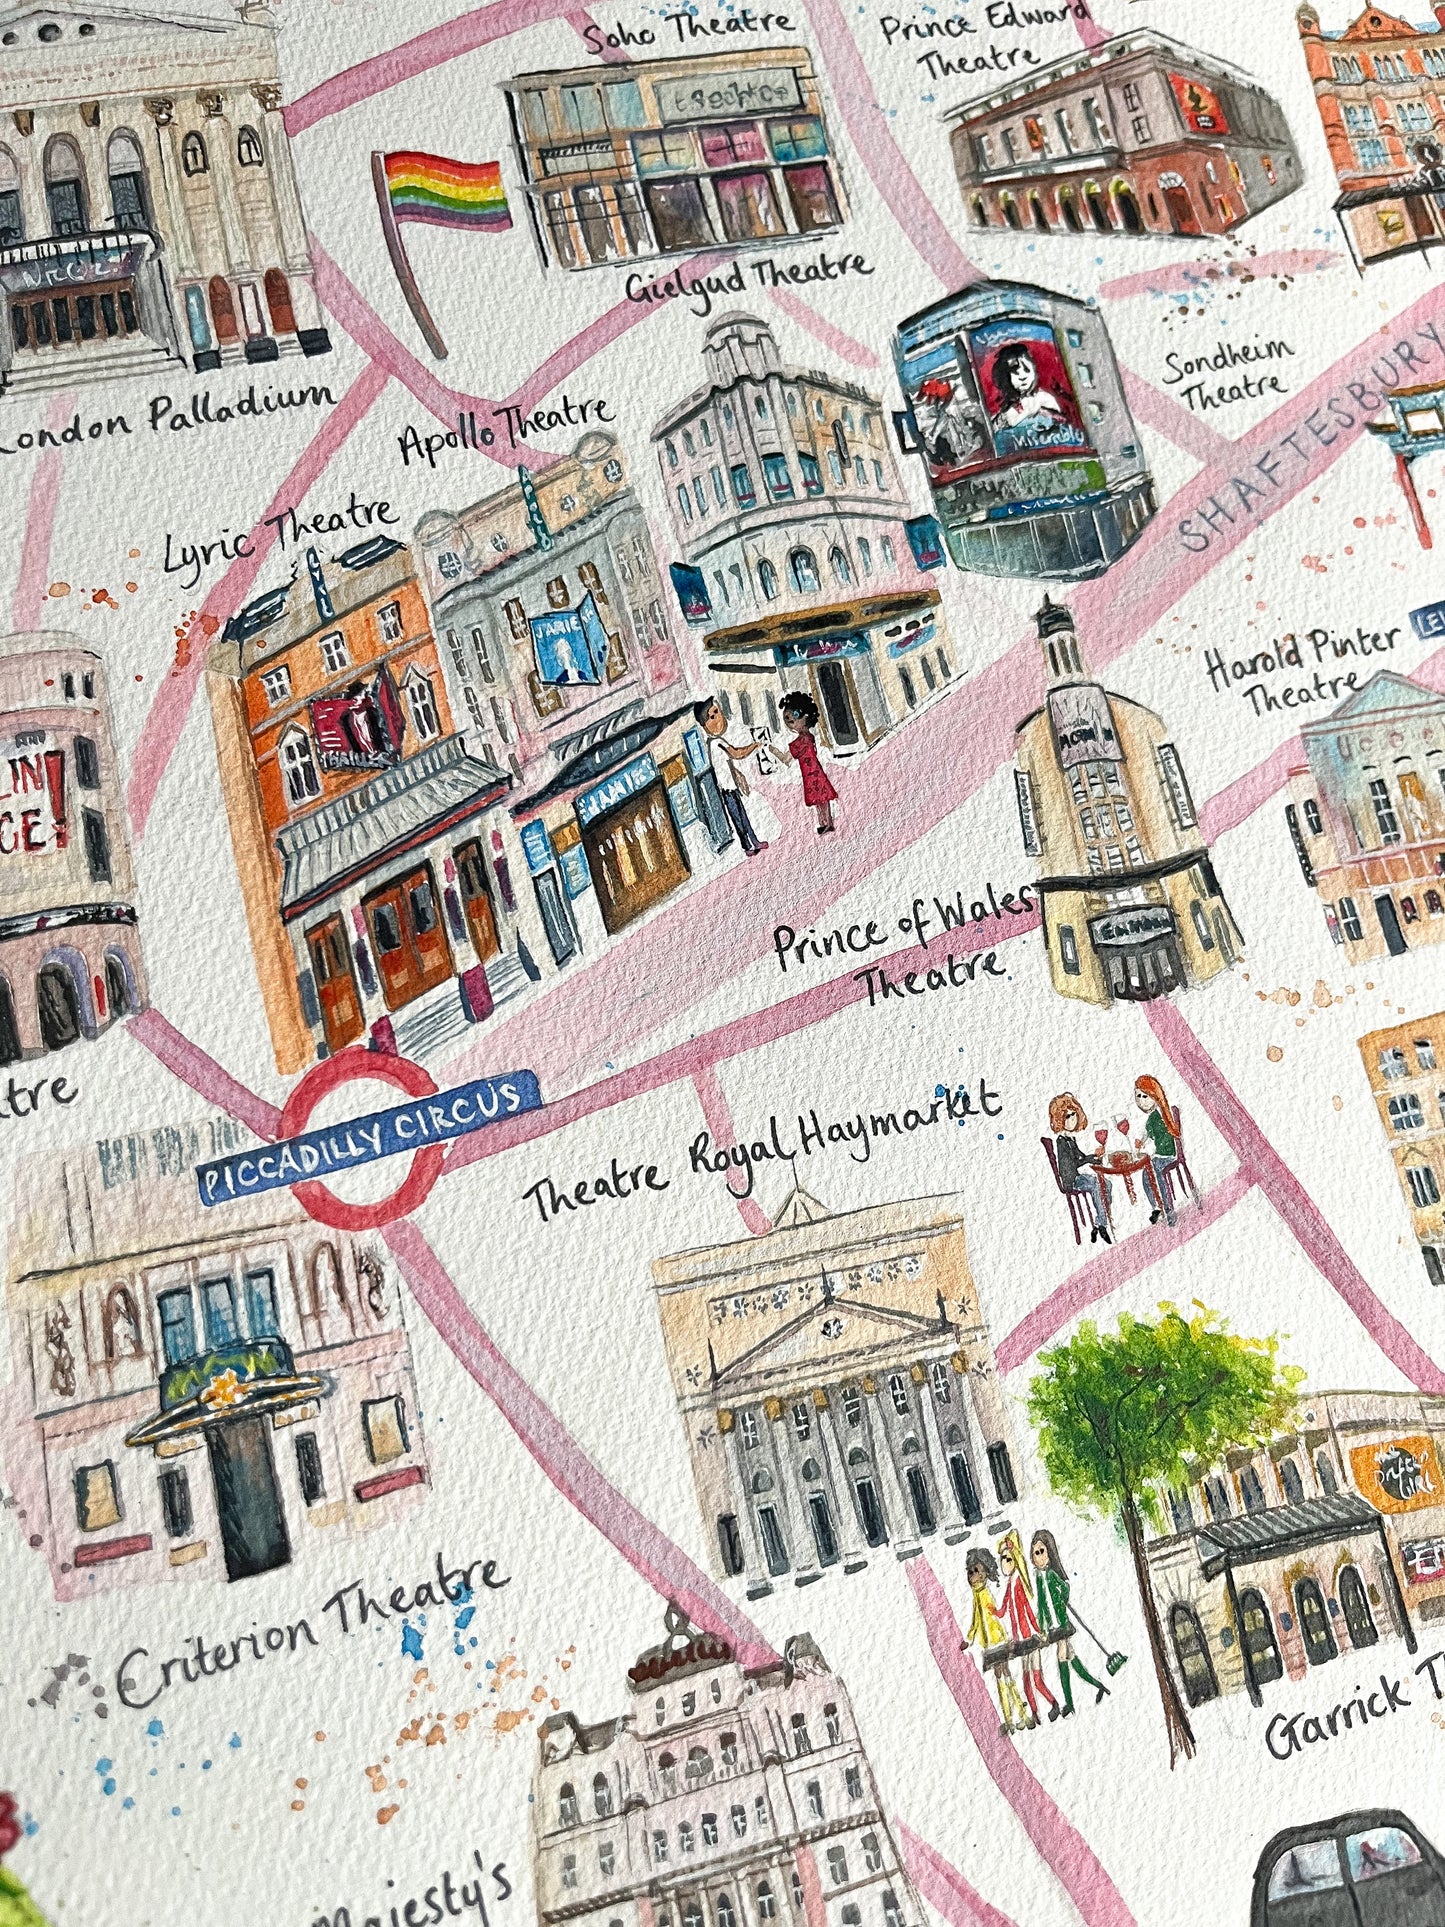 Watercolour illustrations of theatres along Shaftesbury Avenue by Eve Leoni Smith as part of her map of the West End.